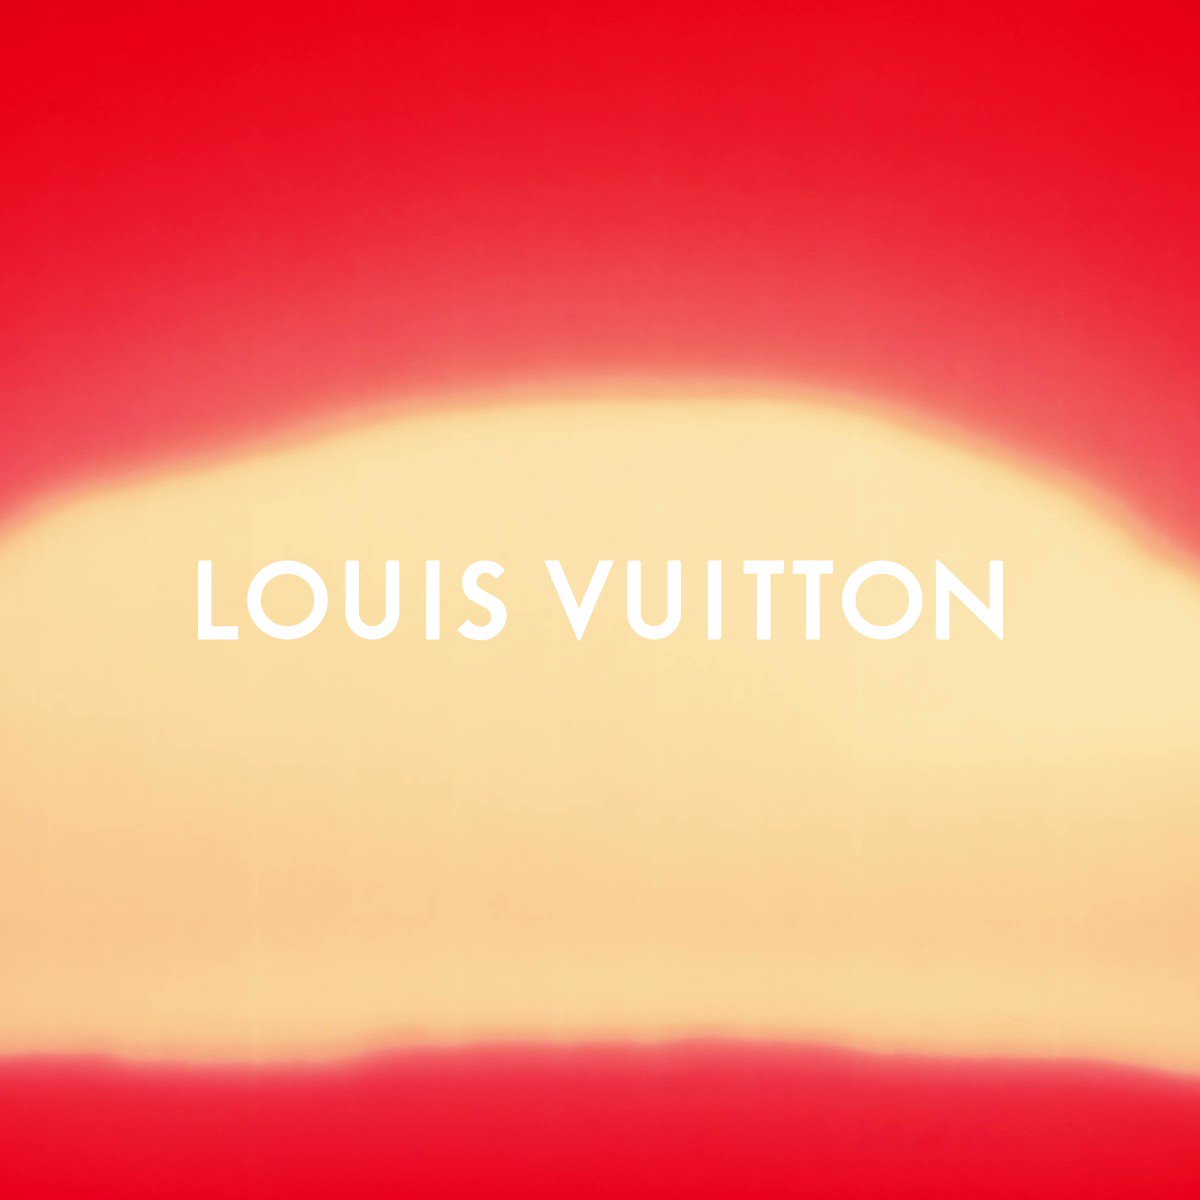 Louis Vuitton on X: Introducing #LouisVuitton's new sunglasses collection.  With elegant, yet bold lines, the new precious details are inspired by the  Maison's ionic creations. Discover the campaign starring #LousAndTheYakuza,  #MillieBobbyBrown and #